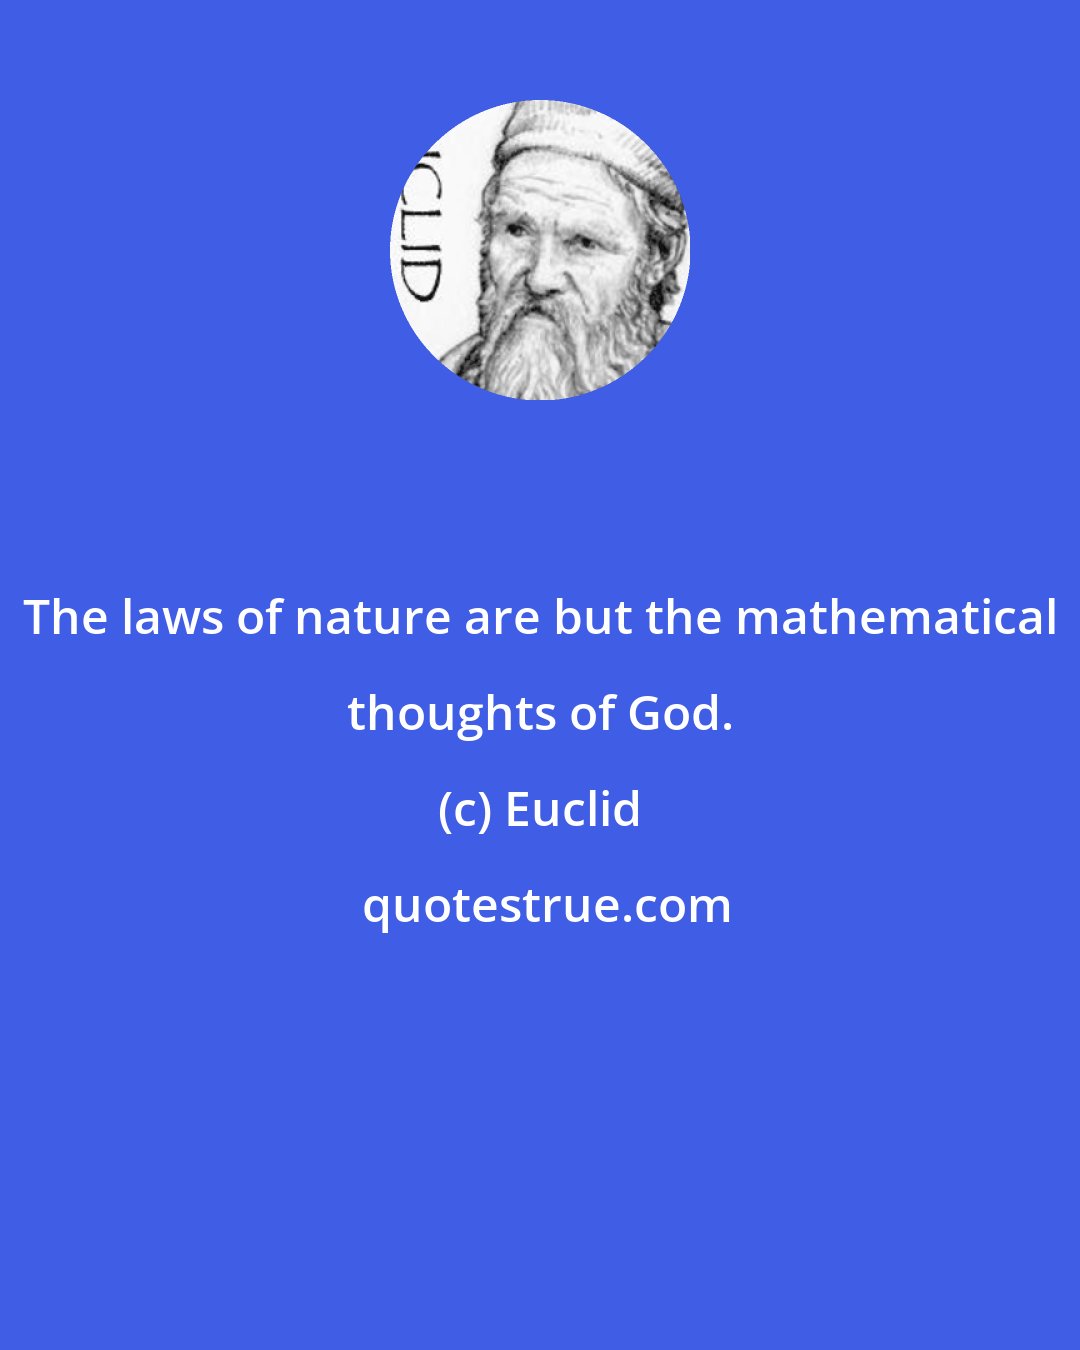 Euclid: The laws of nature are but the mathematical thoughts of God.